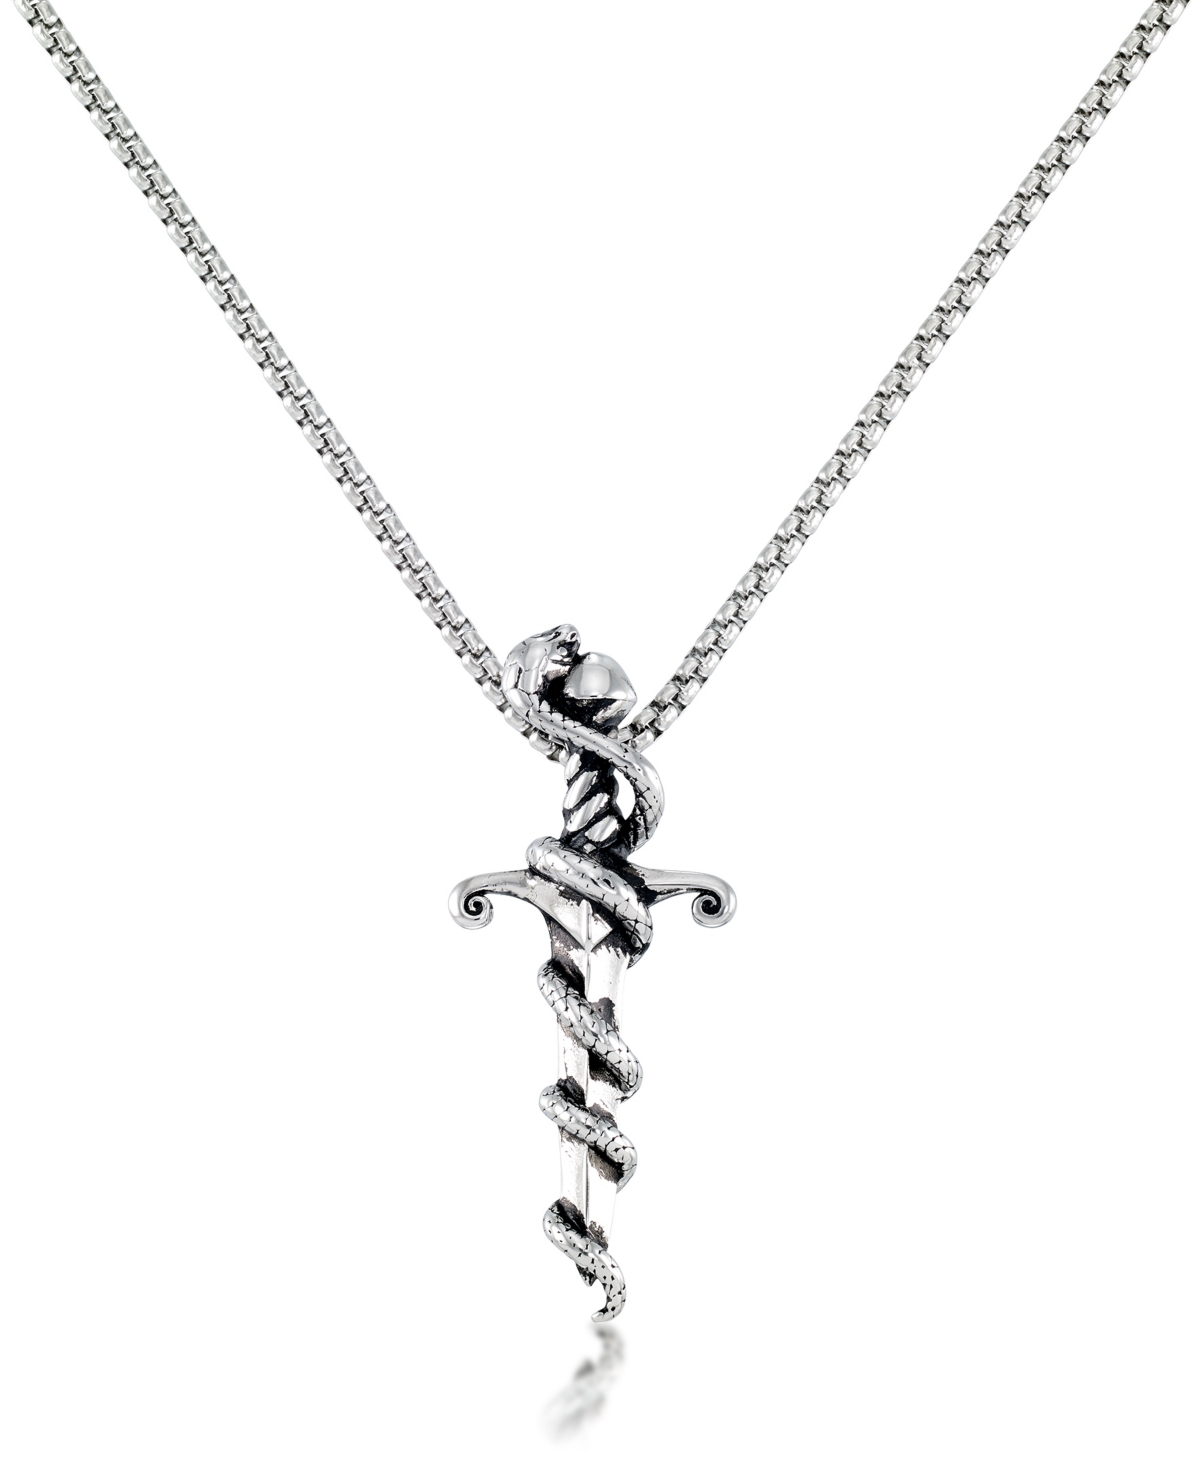 Andrew Charles by Andy Hilfiger Men's Serpent 24" Pendant Necklace in Stainless Steel